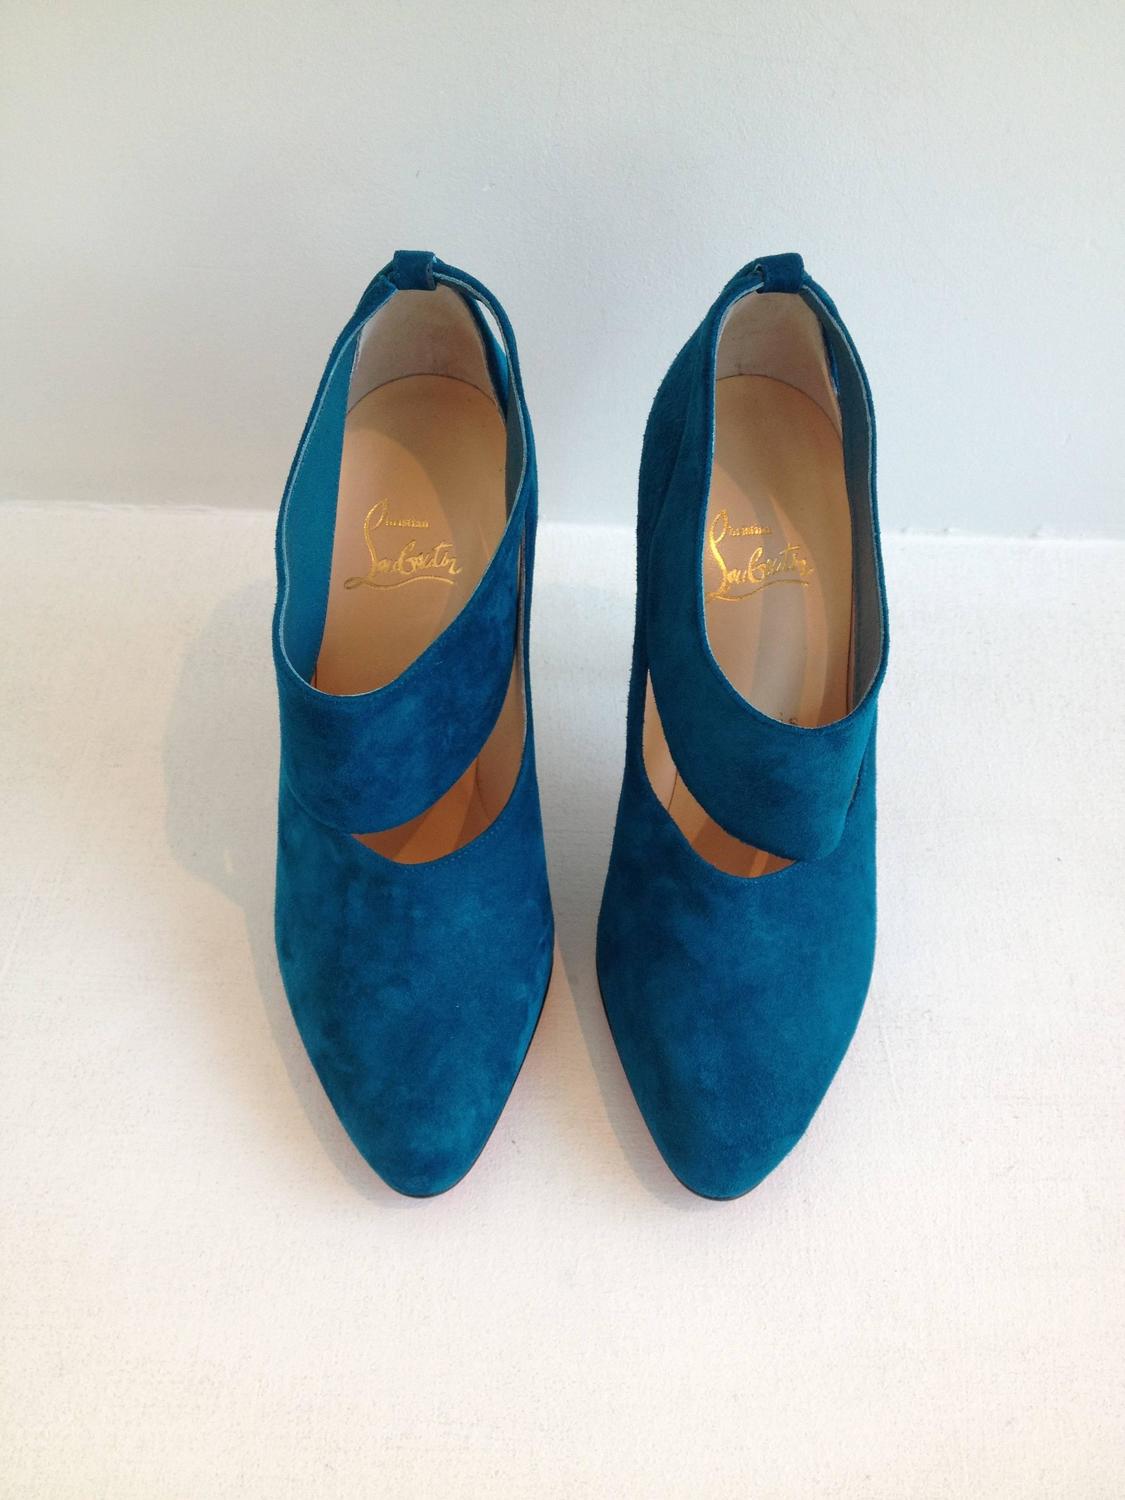 Christian Louboutin Peacock Blue Suede Heels at 1stdibs